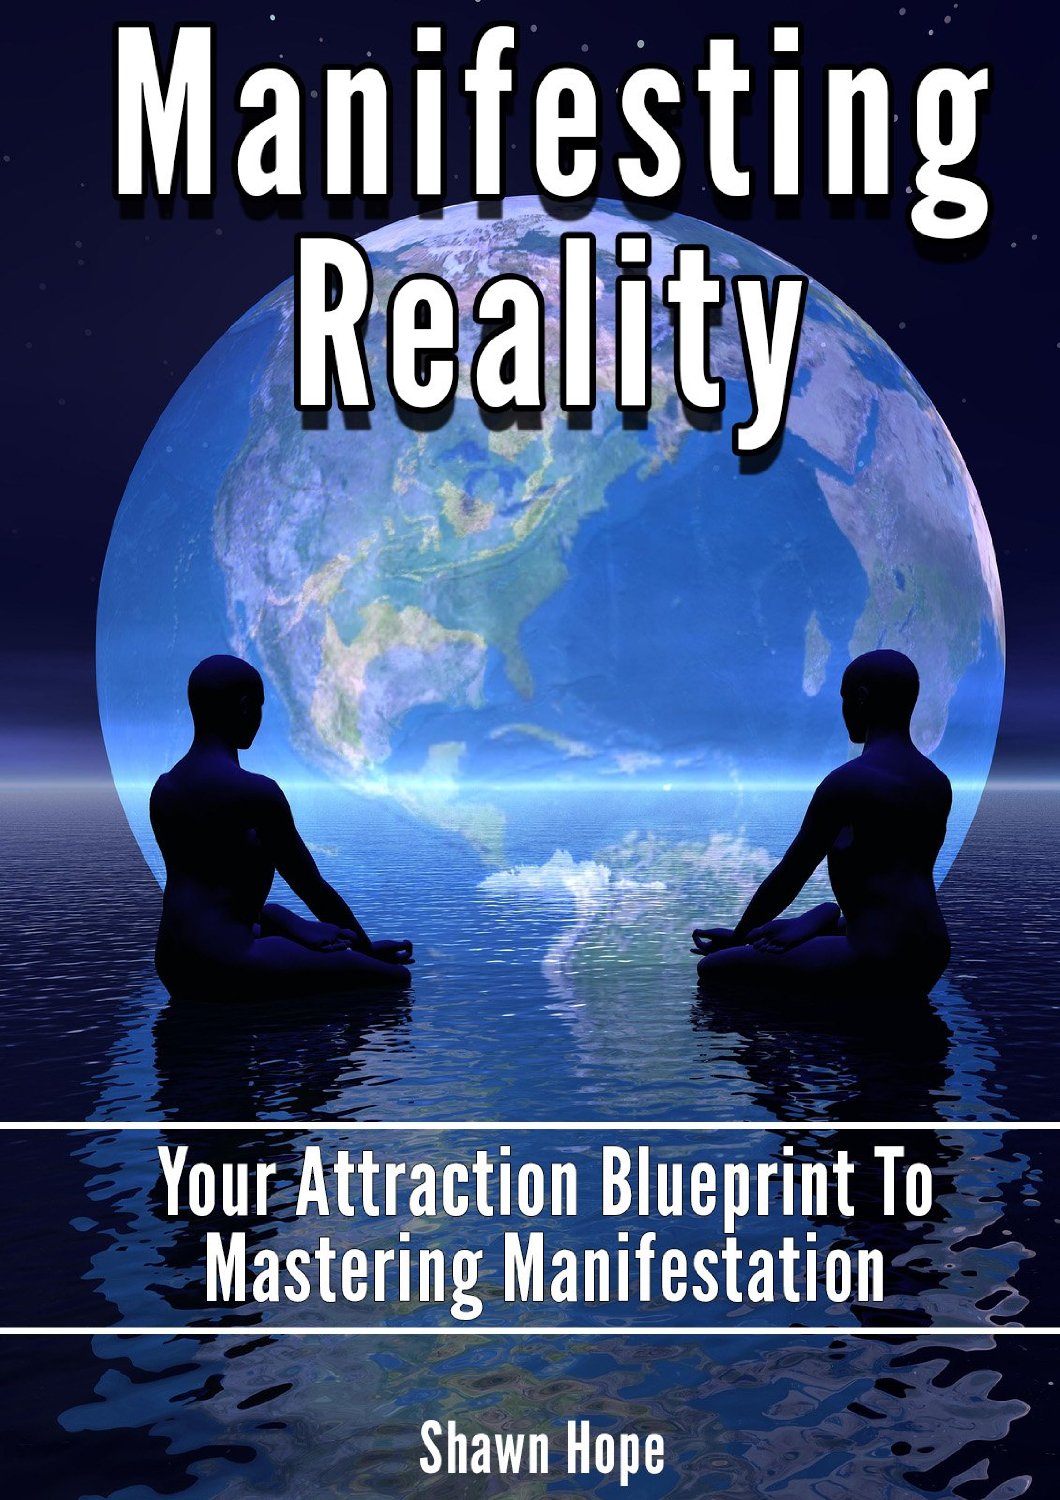 Manifesting Reality by Shawn Hope